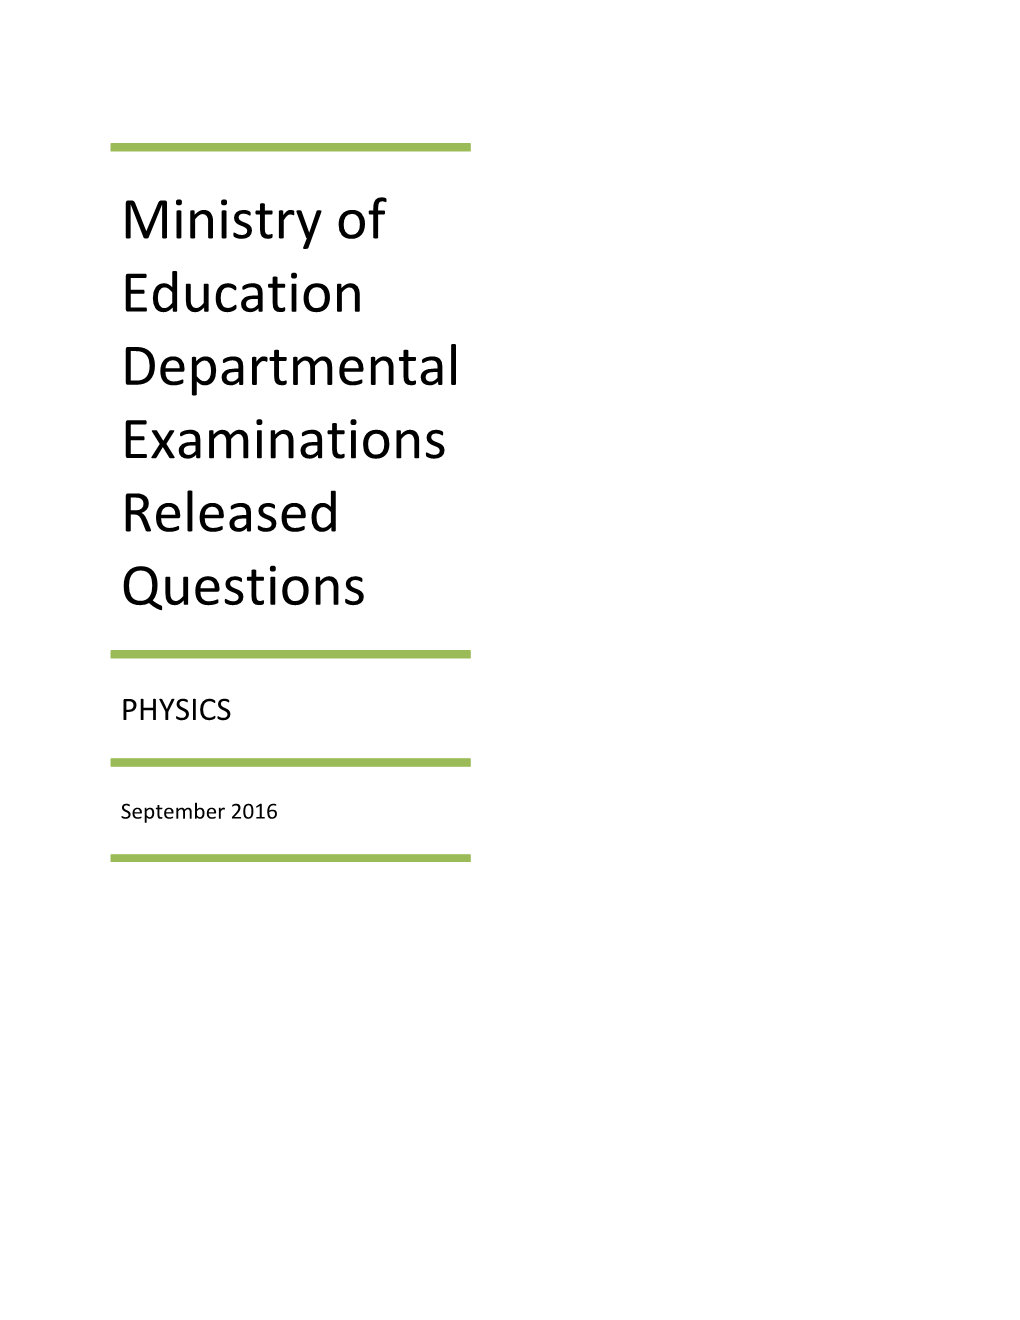 Ministry of Education Departmental Examinations Released Questions